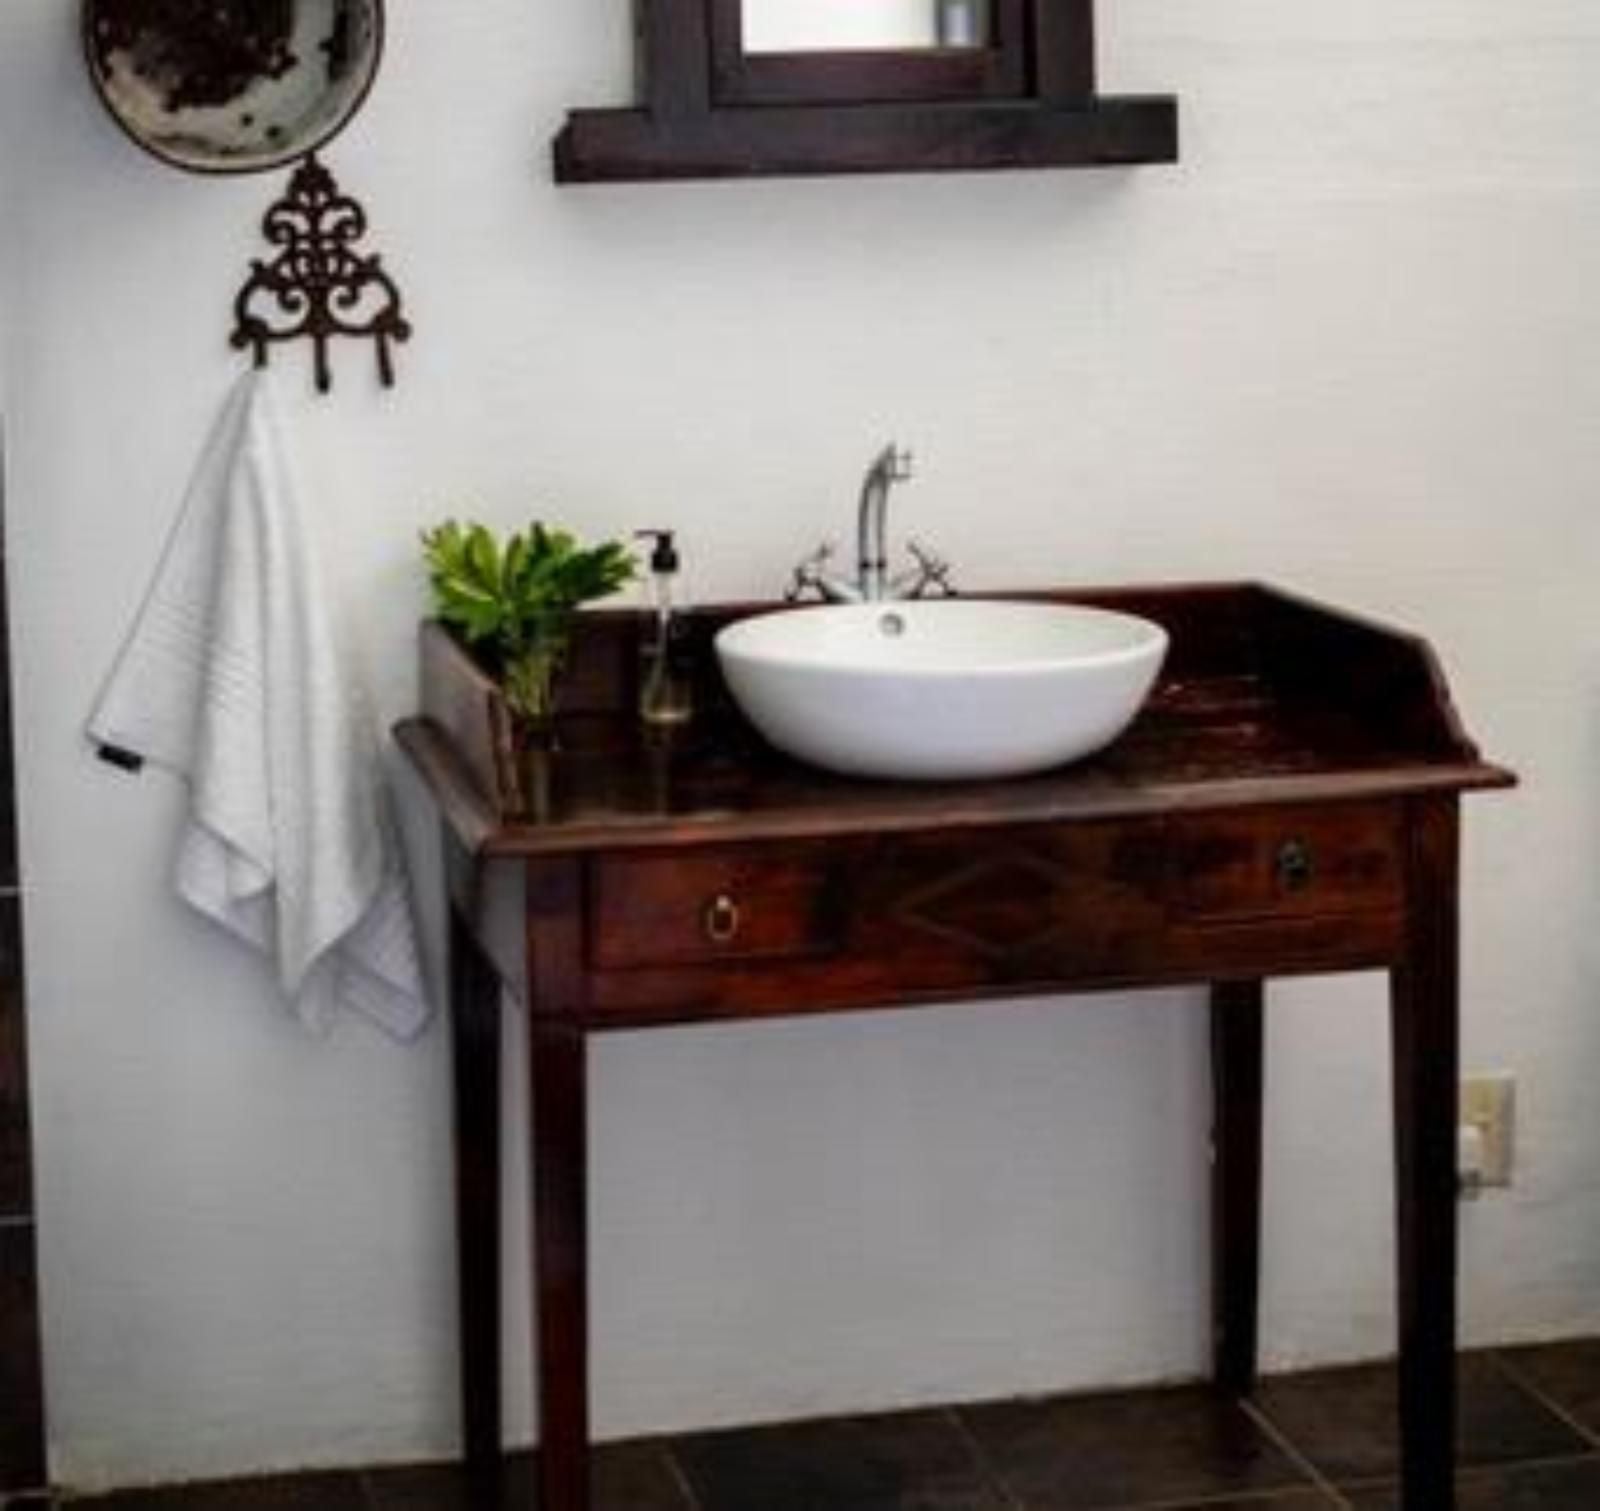 Klein Katryns Bandb And Self Catering Calvinia Northern Cape South Africa Bathroom